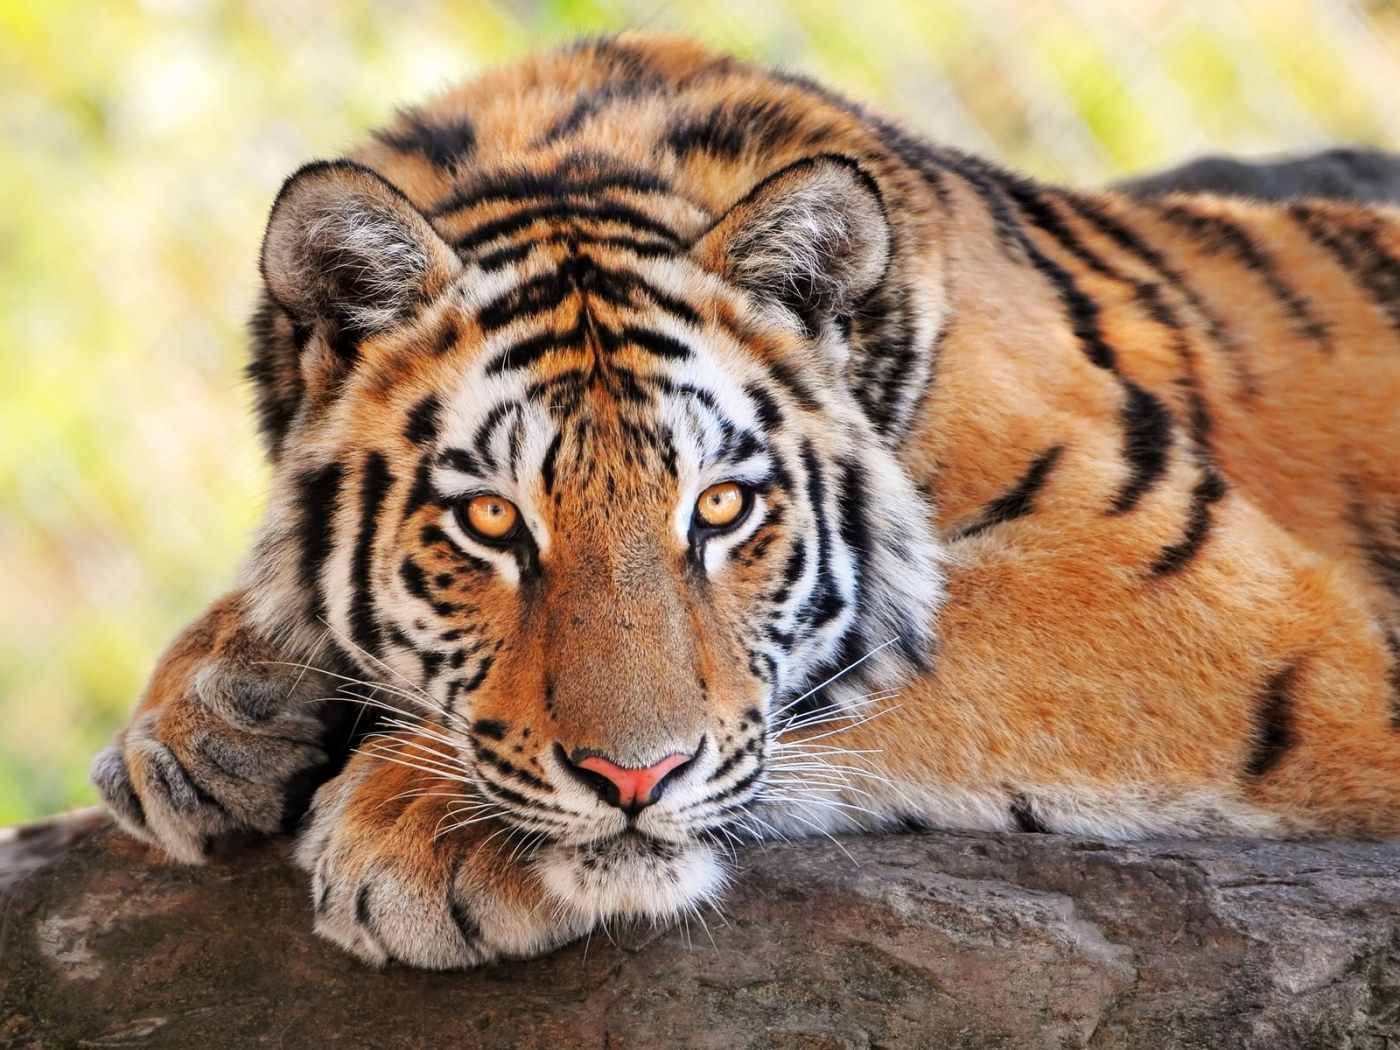 38575 download wallpaper tigers, animals, orange screensavers and pictures for free